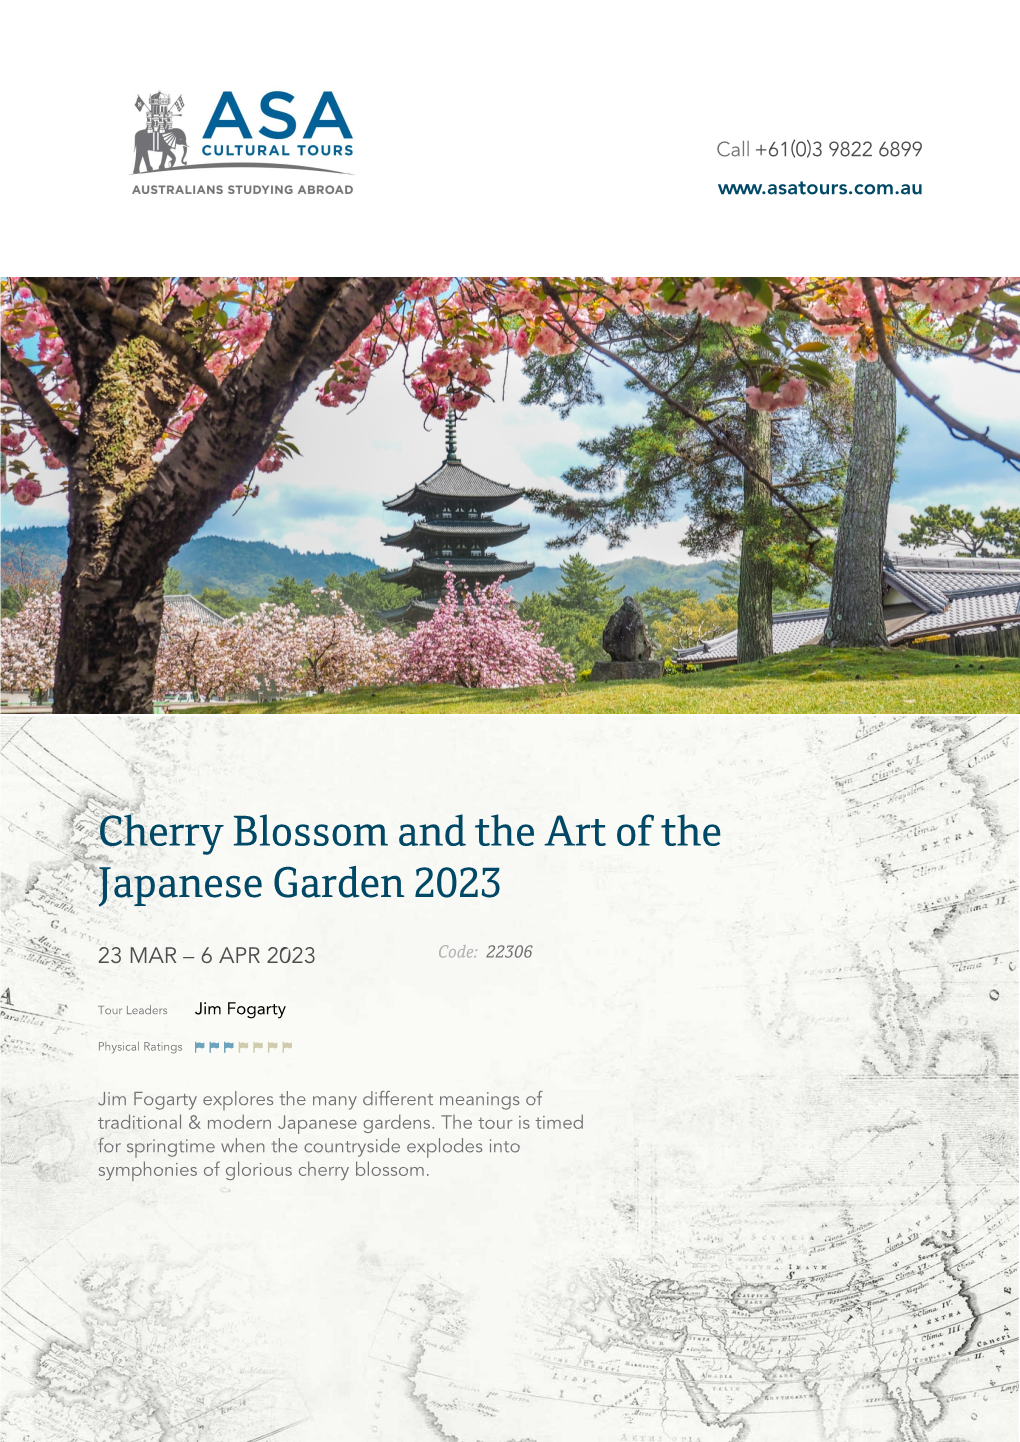 Cherry Blossom and the Art of the Japanese Garden 2023